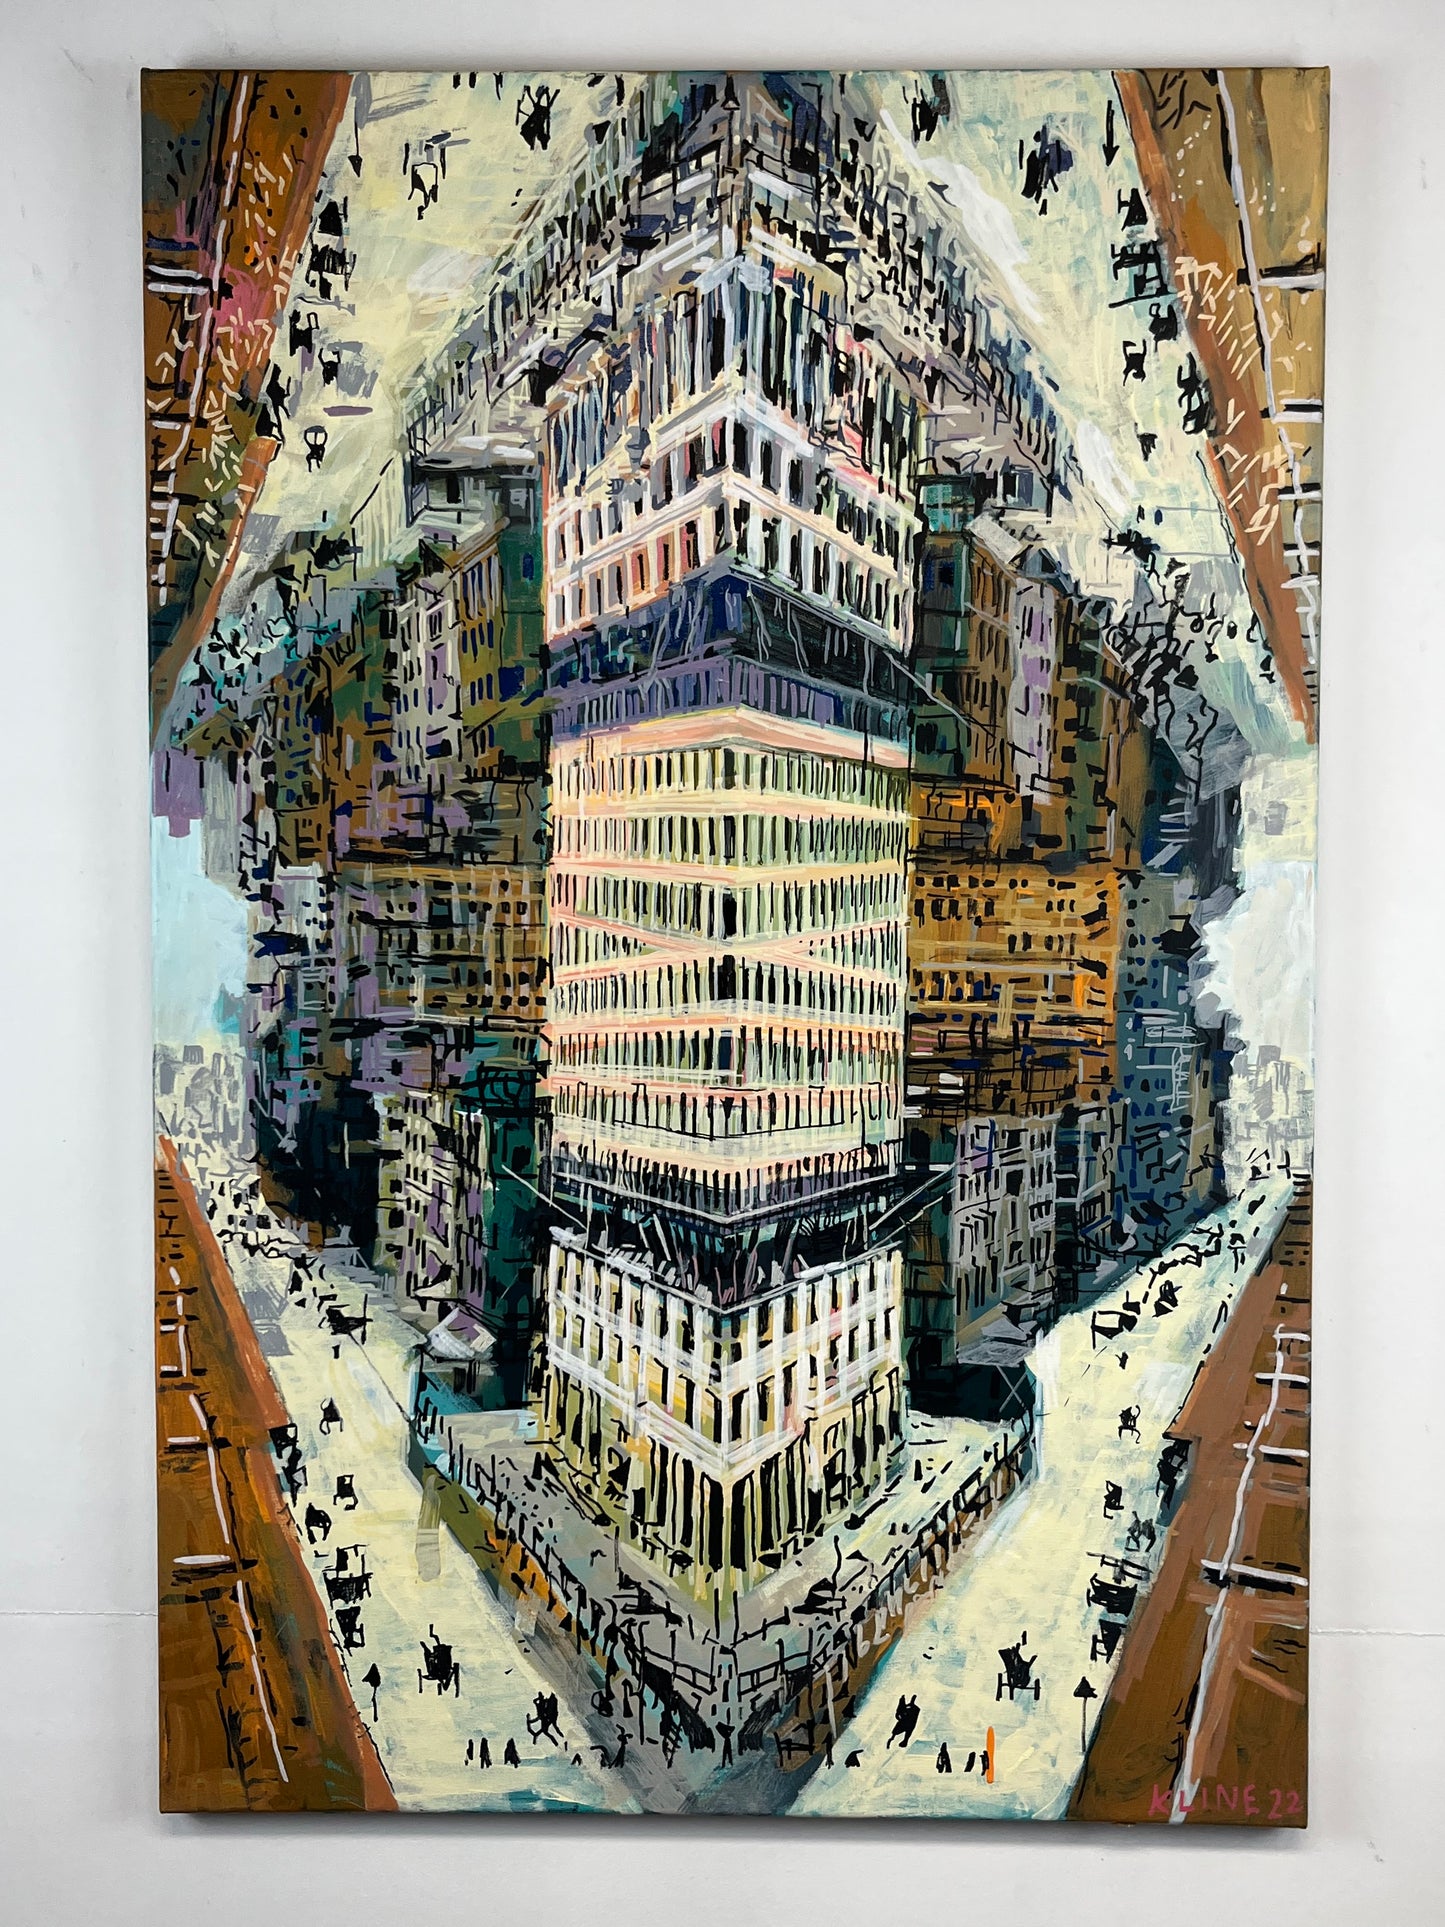 (SOLD) The Flat Iron Building. Acrylic and Oil Markers on Canvas. 24" x 36". John Kline Artwork